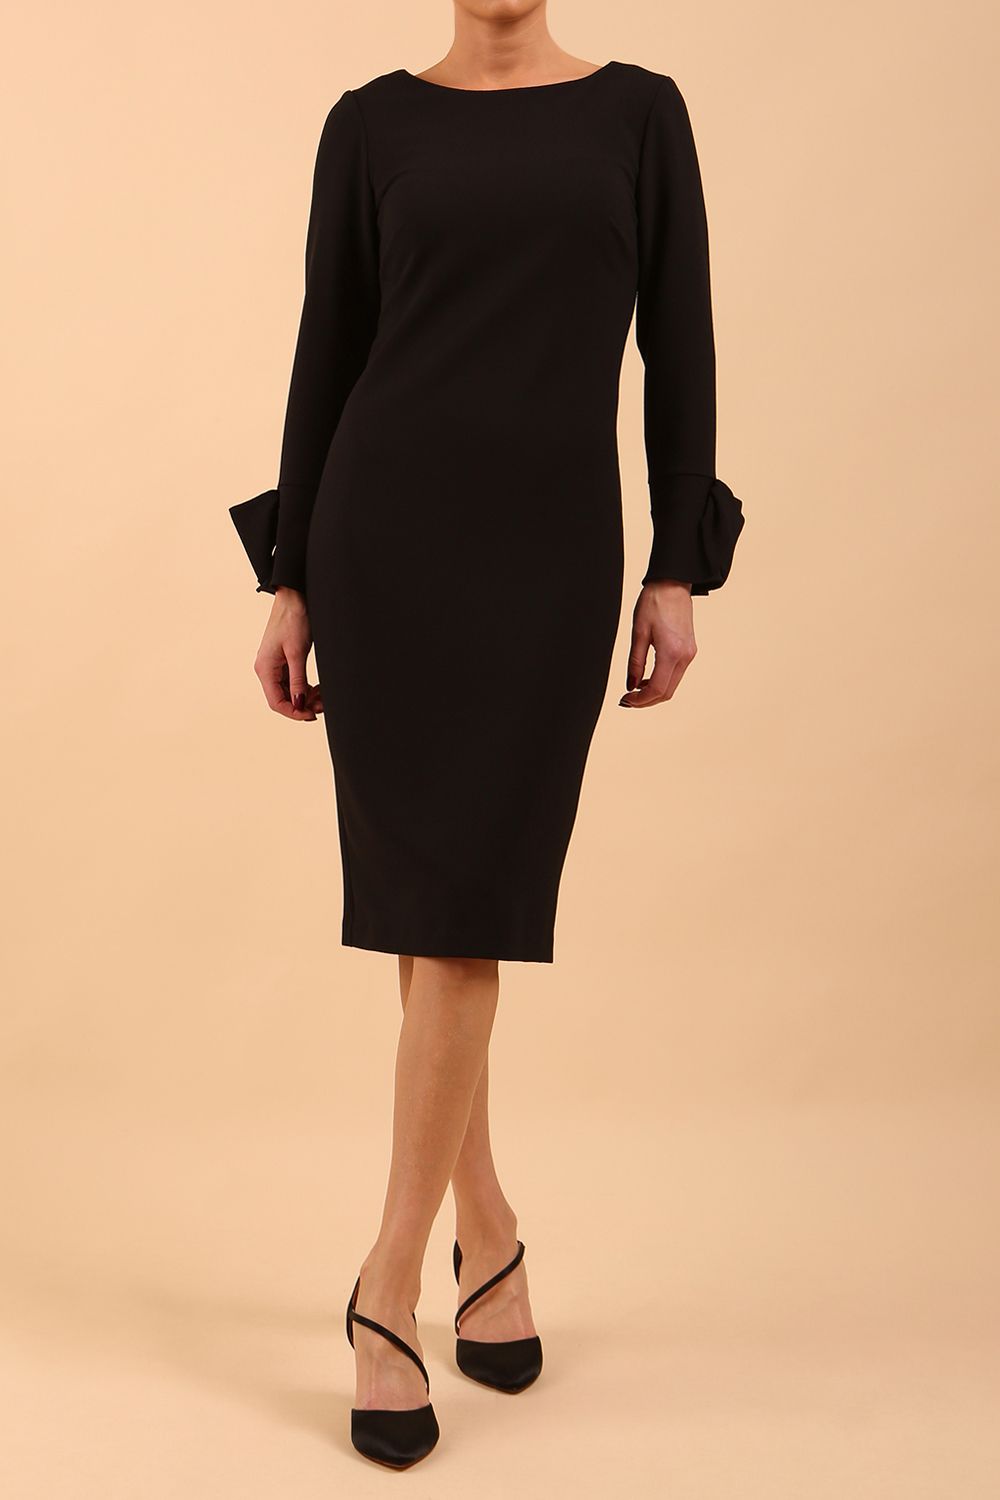 brunette model wearing diva catwalk fitted dress with sleeves called Alma Pencil-skirt dress in colour black with bow detail on sleeves front